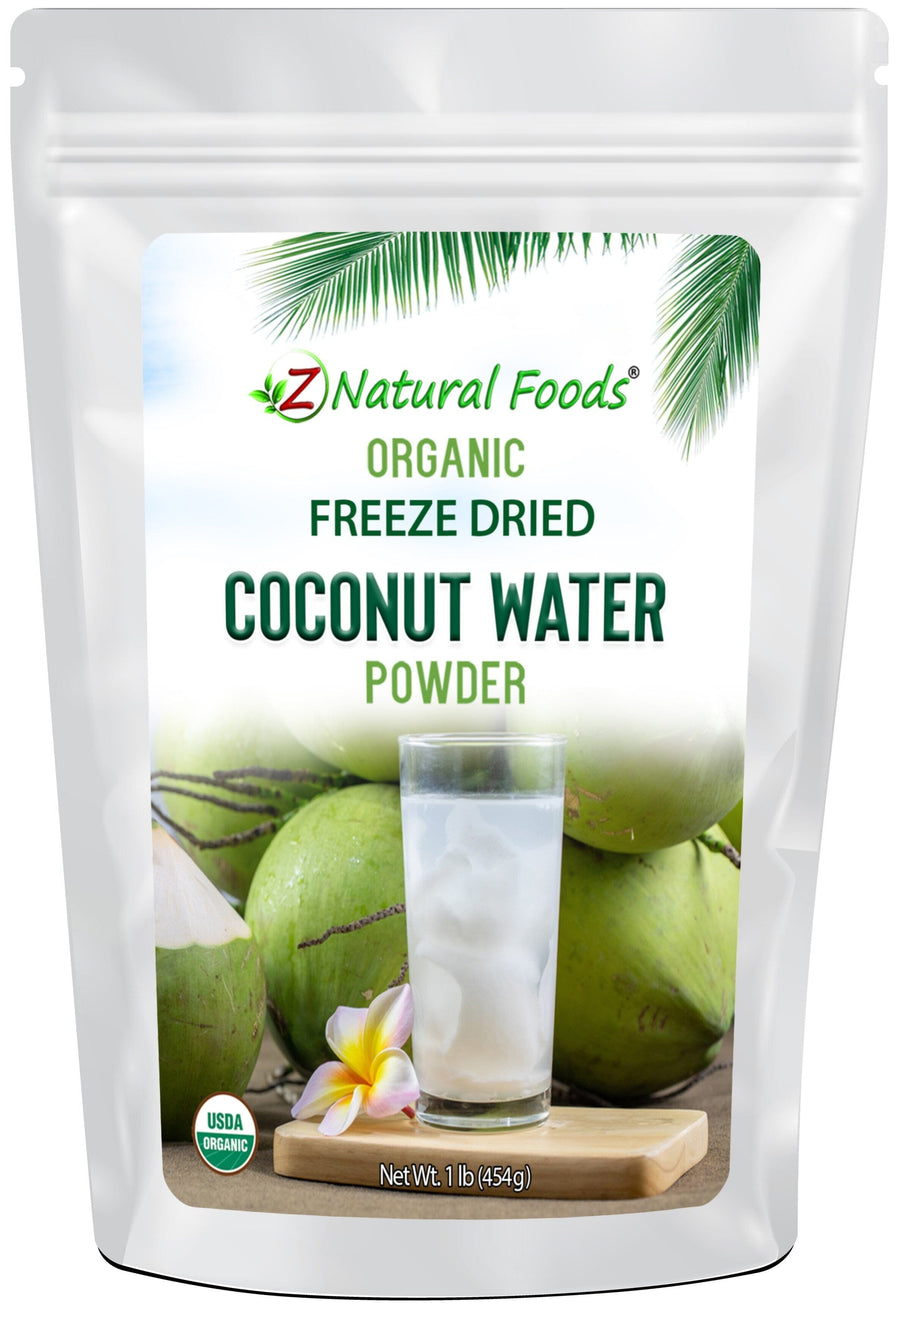 1 lb Coconut Water Powder - Organic Freeze Dried front of bag image Z Natural Foods 